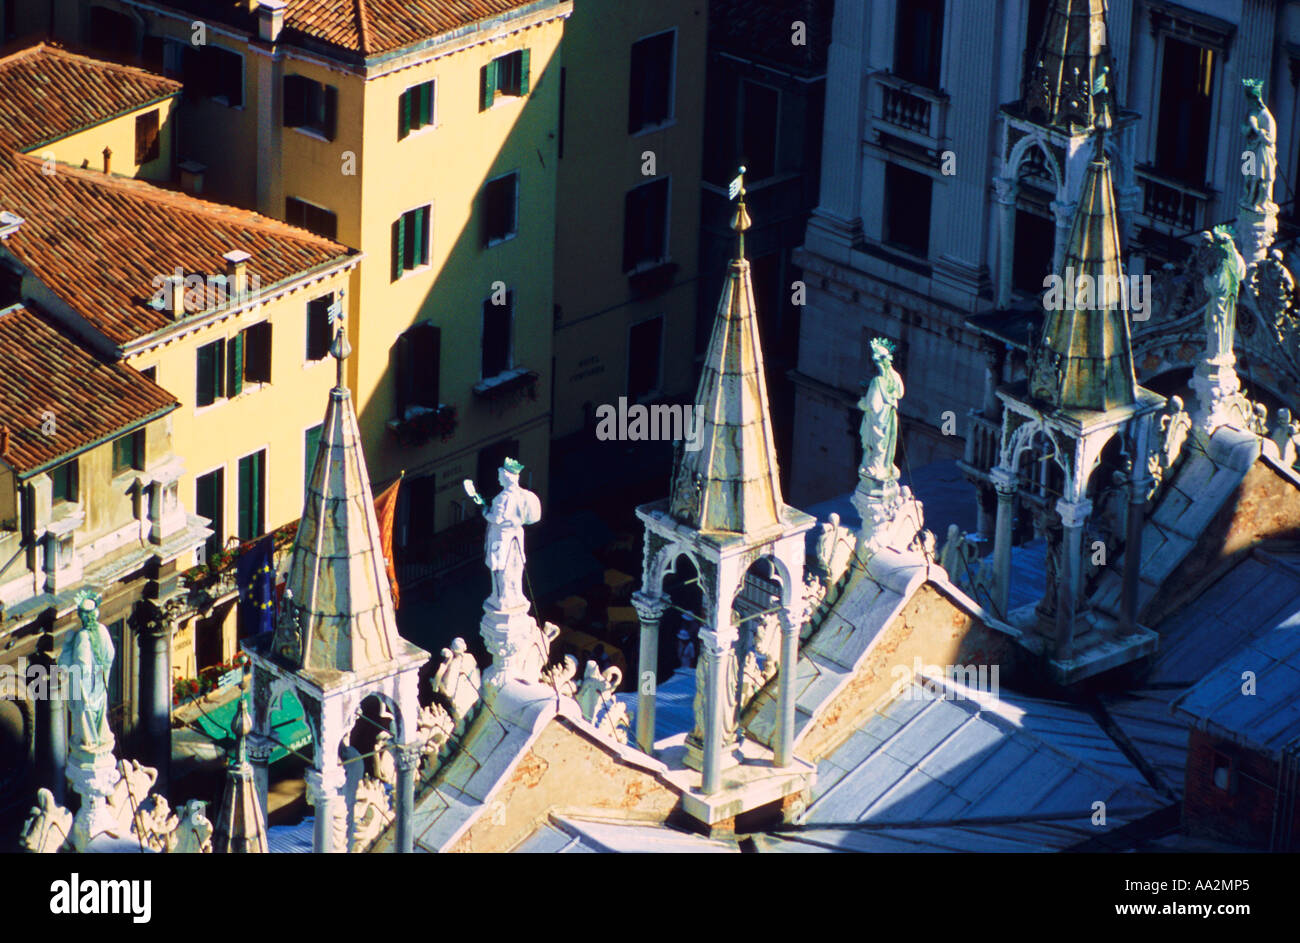 Italy, Venice, Basilica di San Marco Saint Mark Basilique with stone carvings on rooftop overlooking sunlit yellow buildings, el Stock Photo